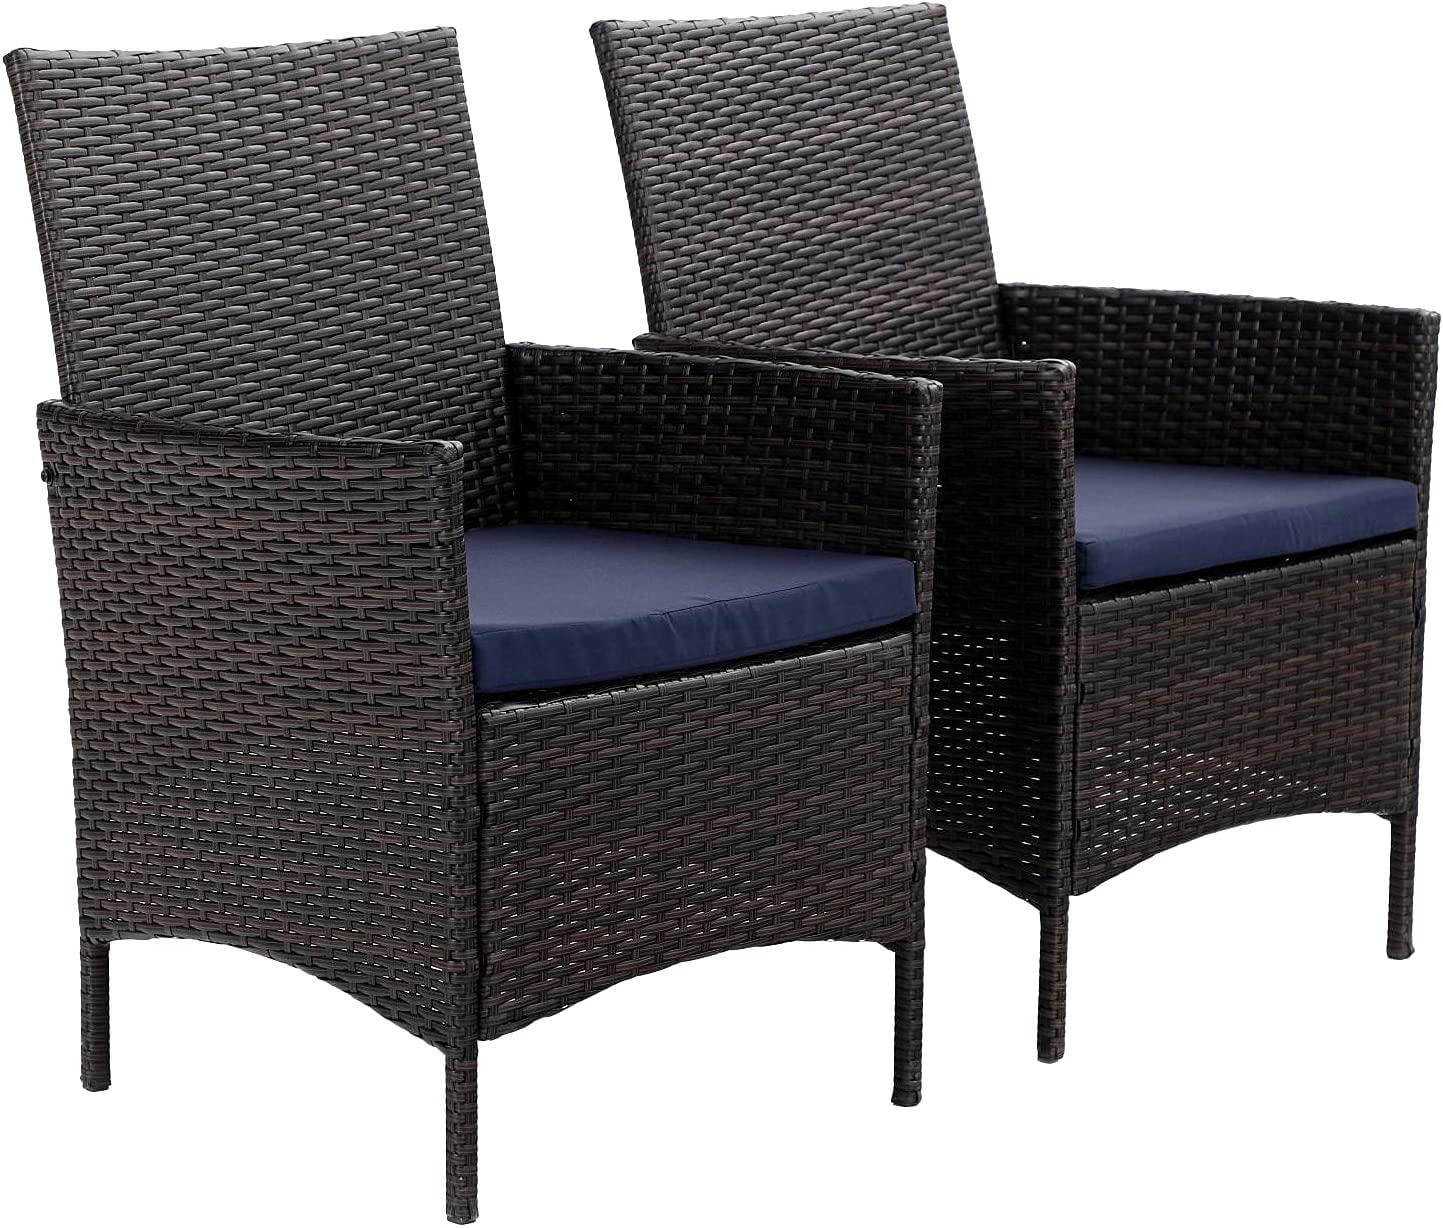 Sophia & William 7 Pieces Outdoor Patio Dining Set, Wicker Dining Chairs and Outdoor Dining Table with PVC Table Top